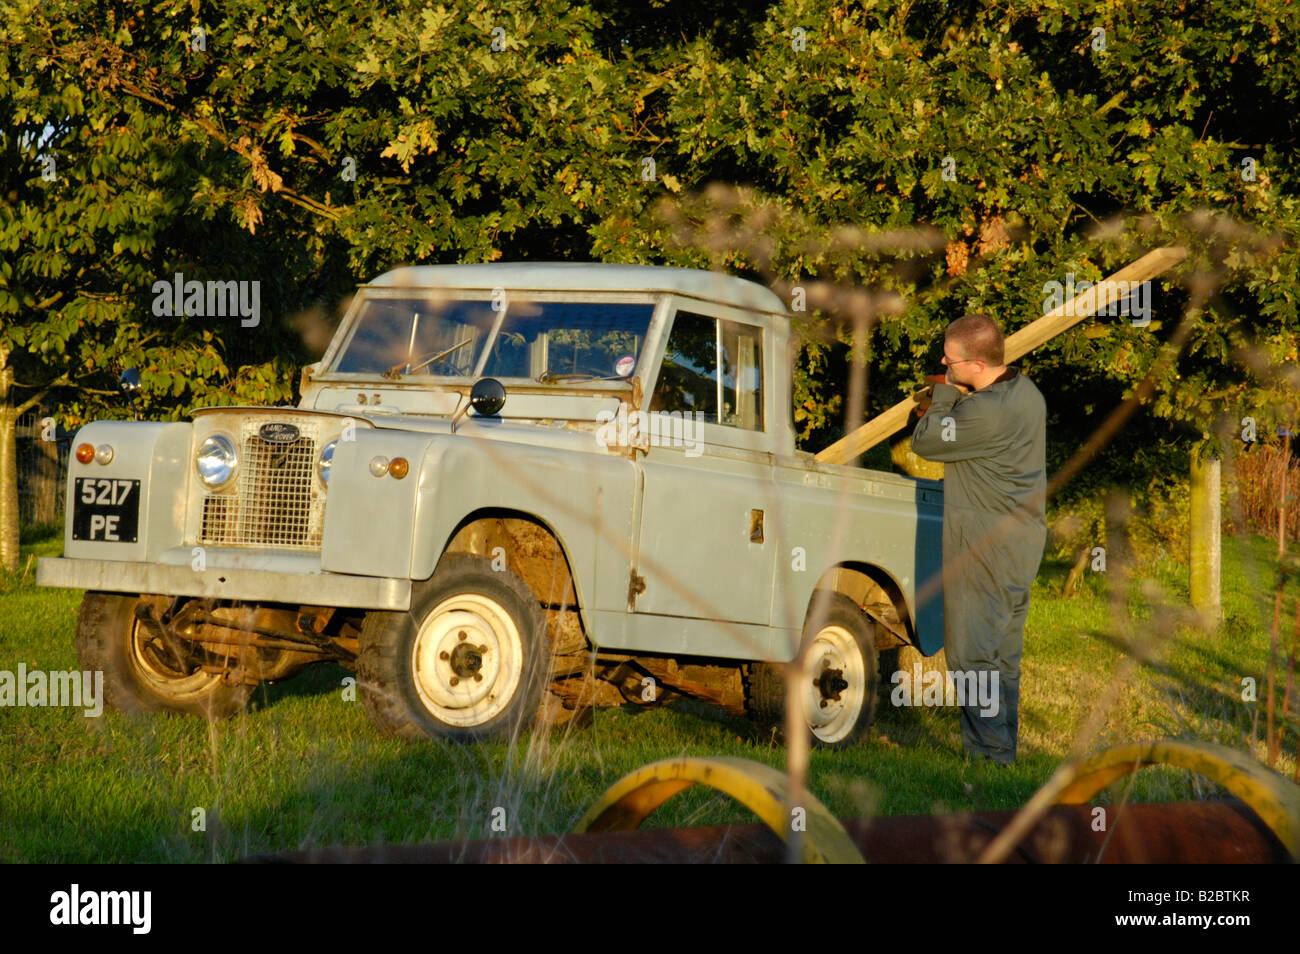 Workman in overall loading a timber beam into the back of a historic 1963 Landrover Series 2a truckcab in very original and ... Stock Photo